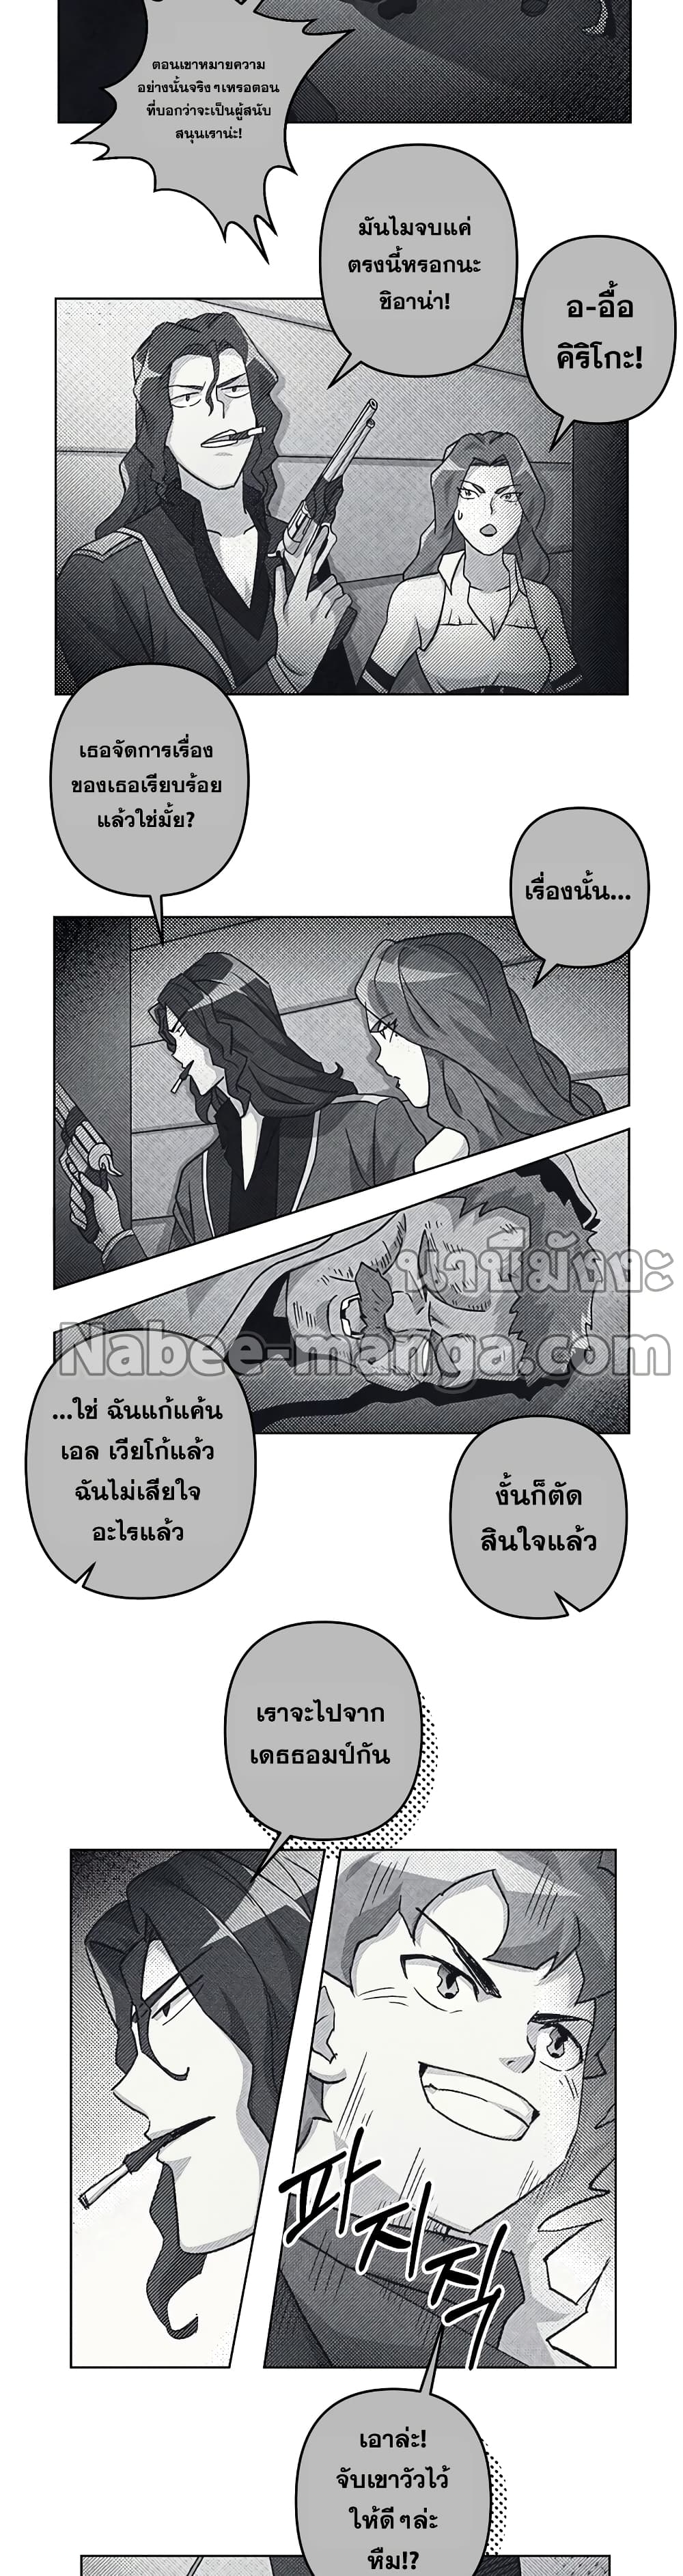 Surviving in an Action Manhwa 26-26